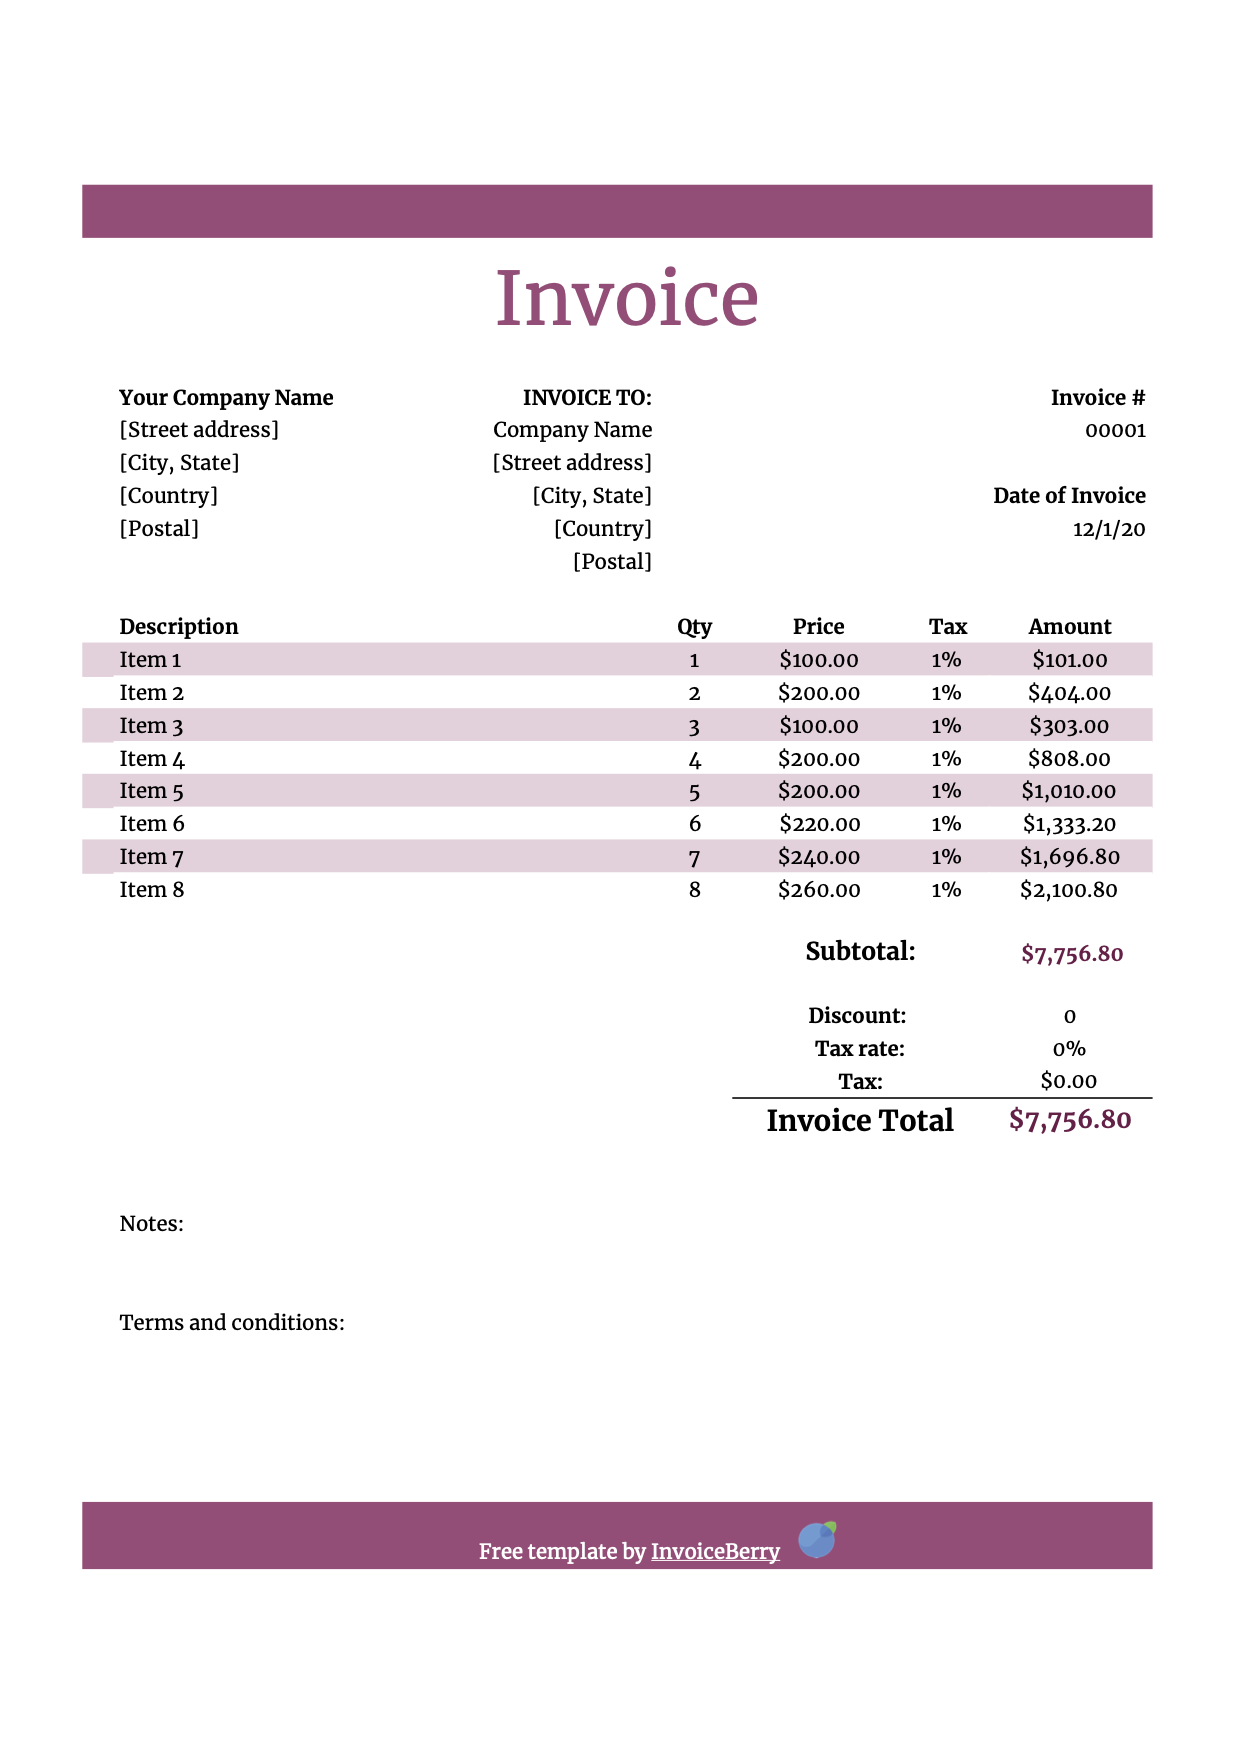 Free Numbers invoice templates - get invoice templates for Mac Regarding Free Invoice Template For Iphone